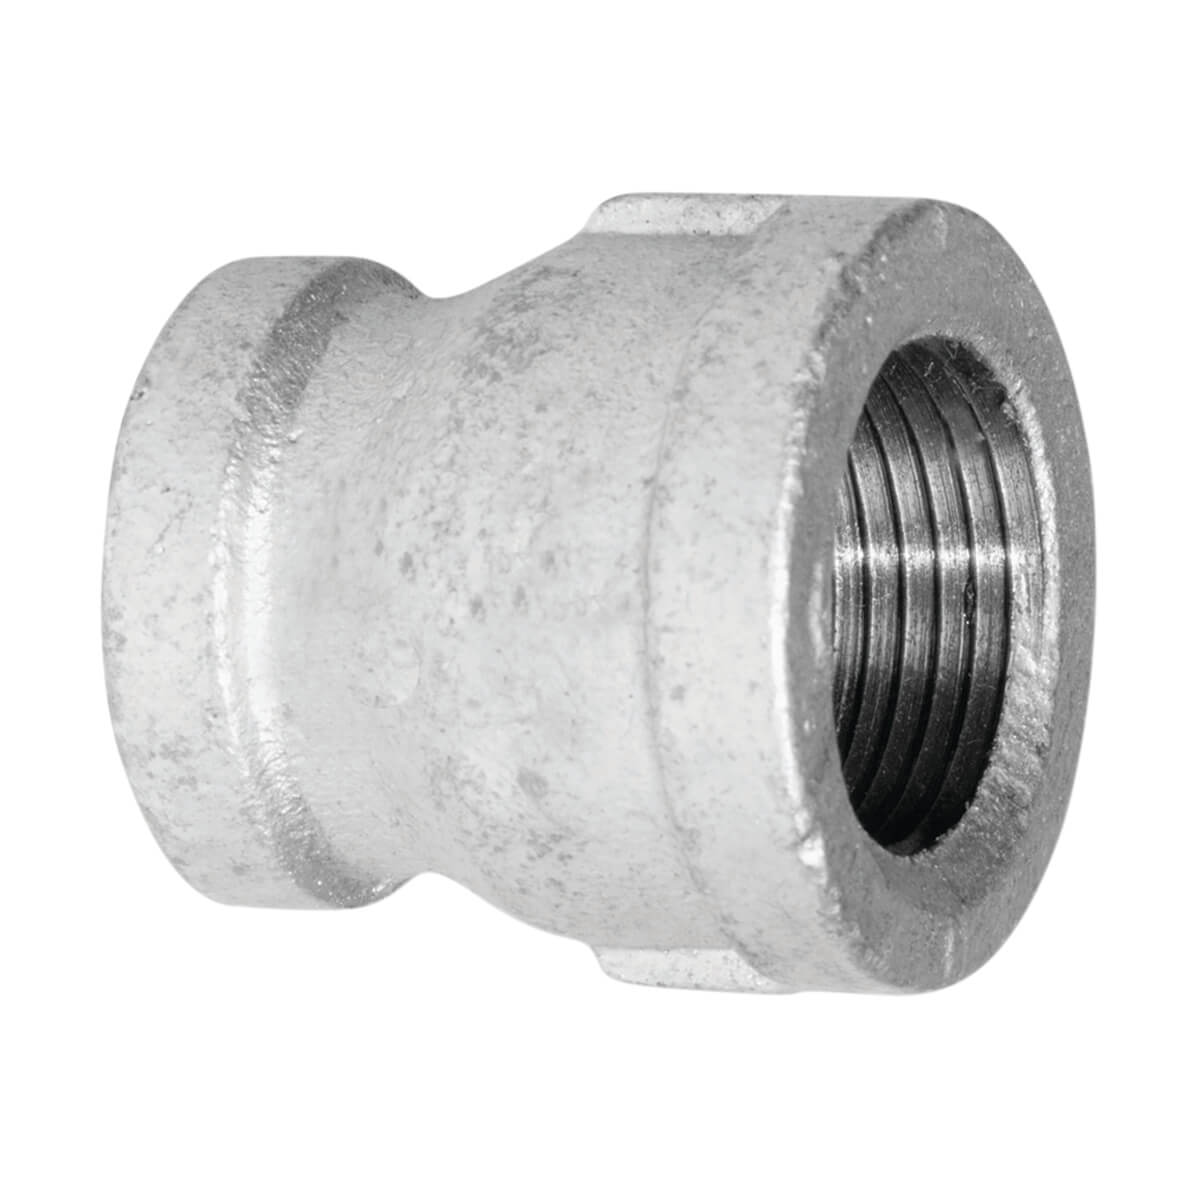 Fitting Galvanized Iron Coupling - 2-in x 1-½-in